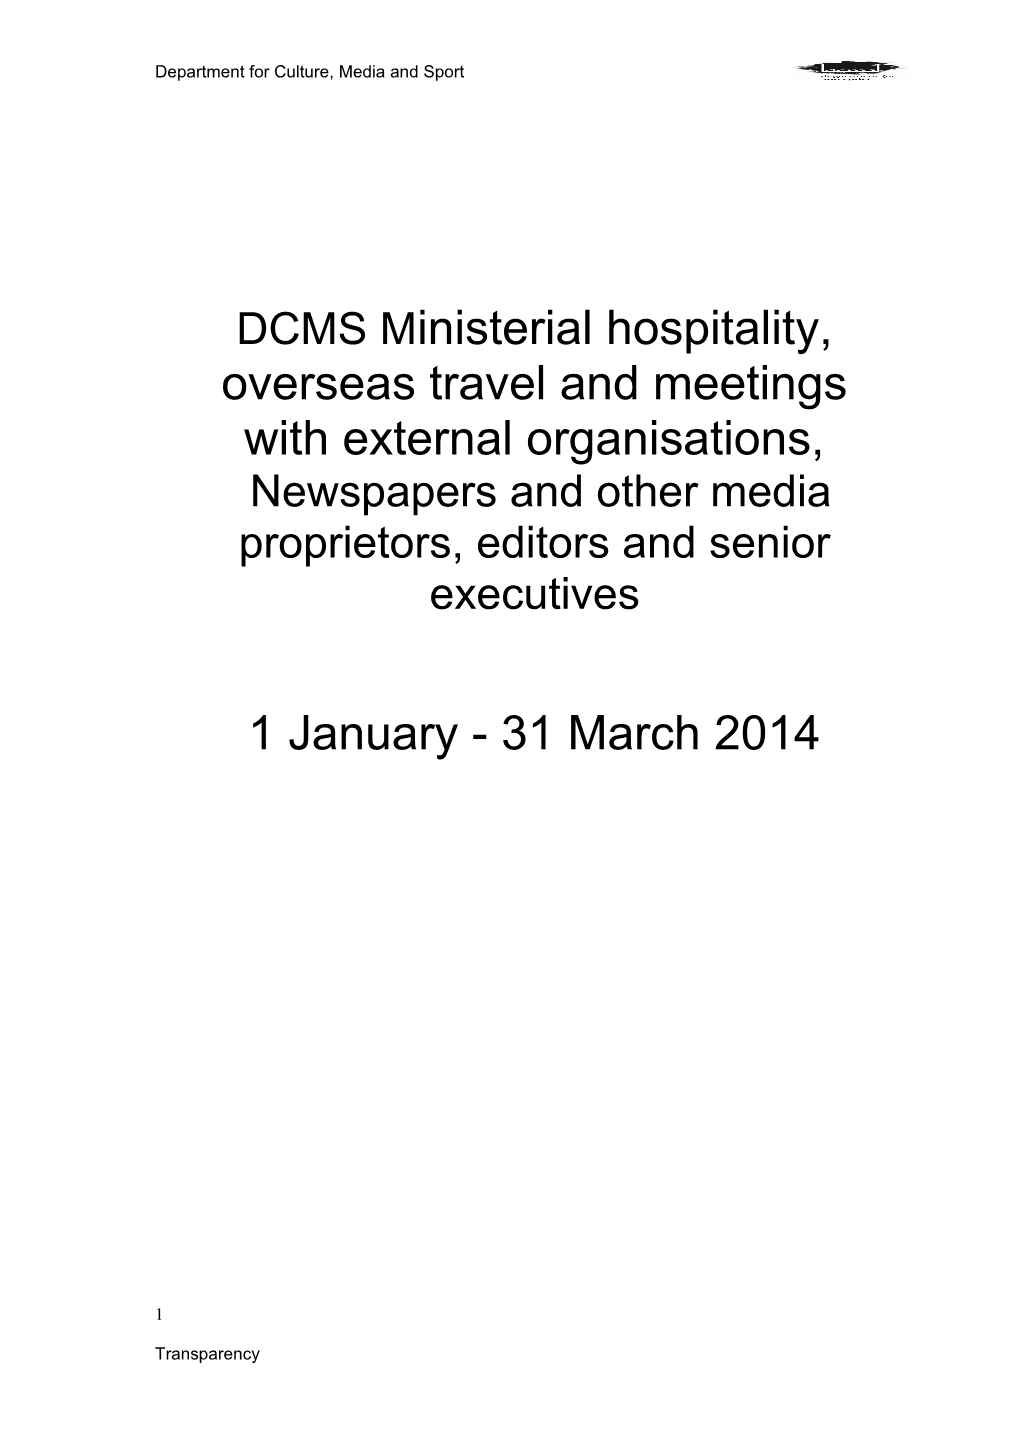 DCMS Ministerial Hospitality, Overseas Travel and Meetings with External Organisations